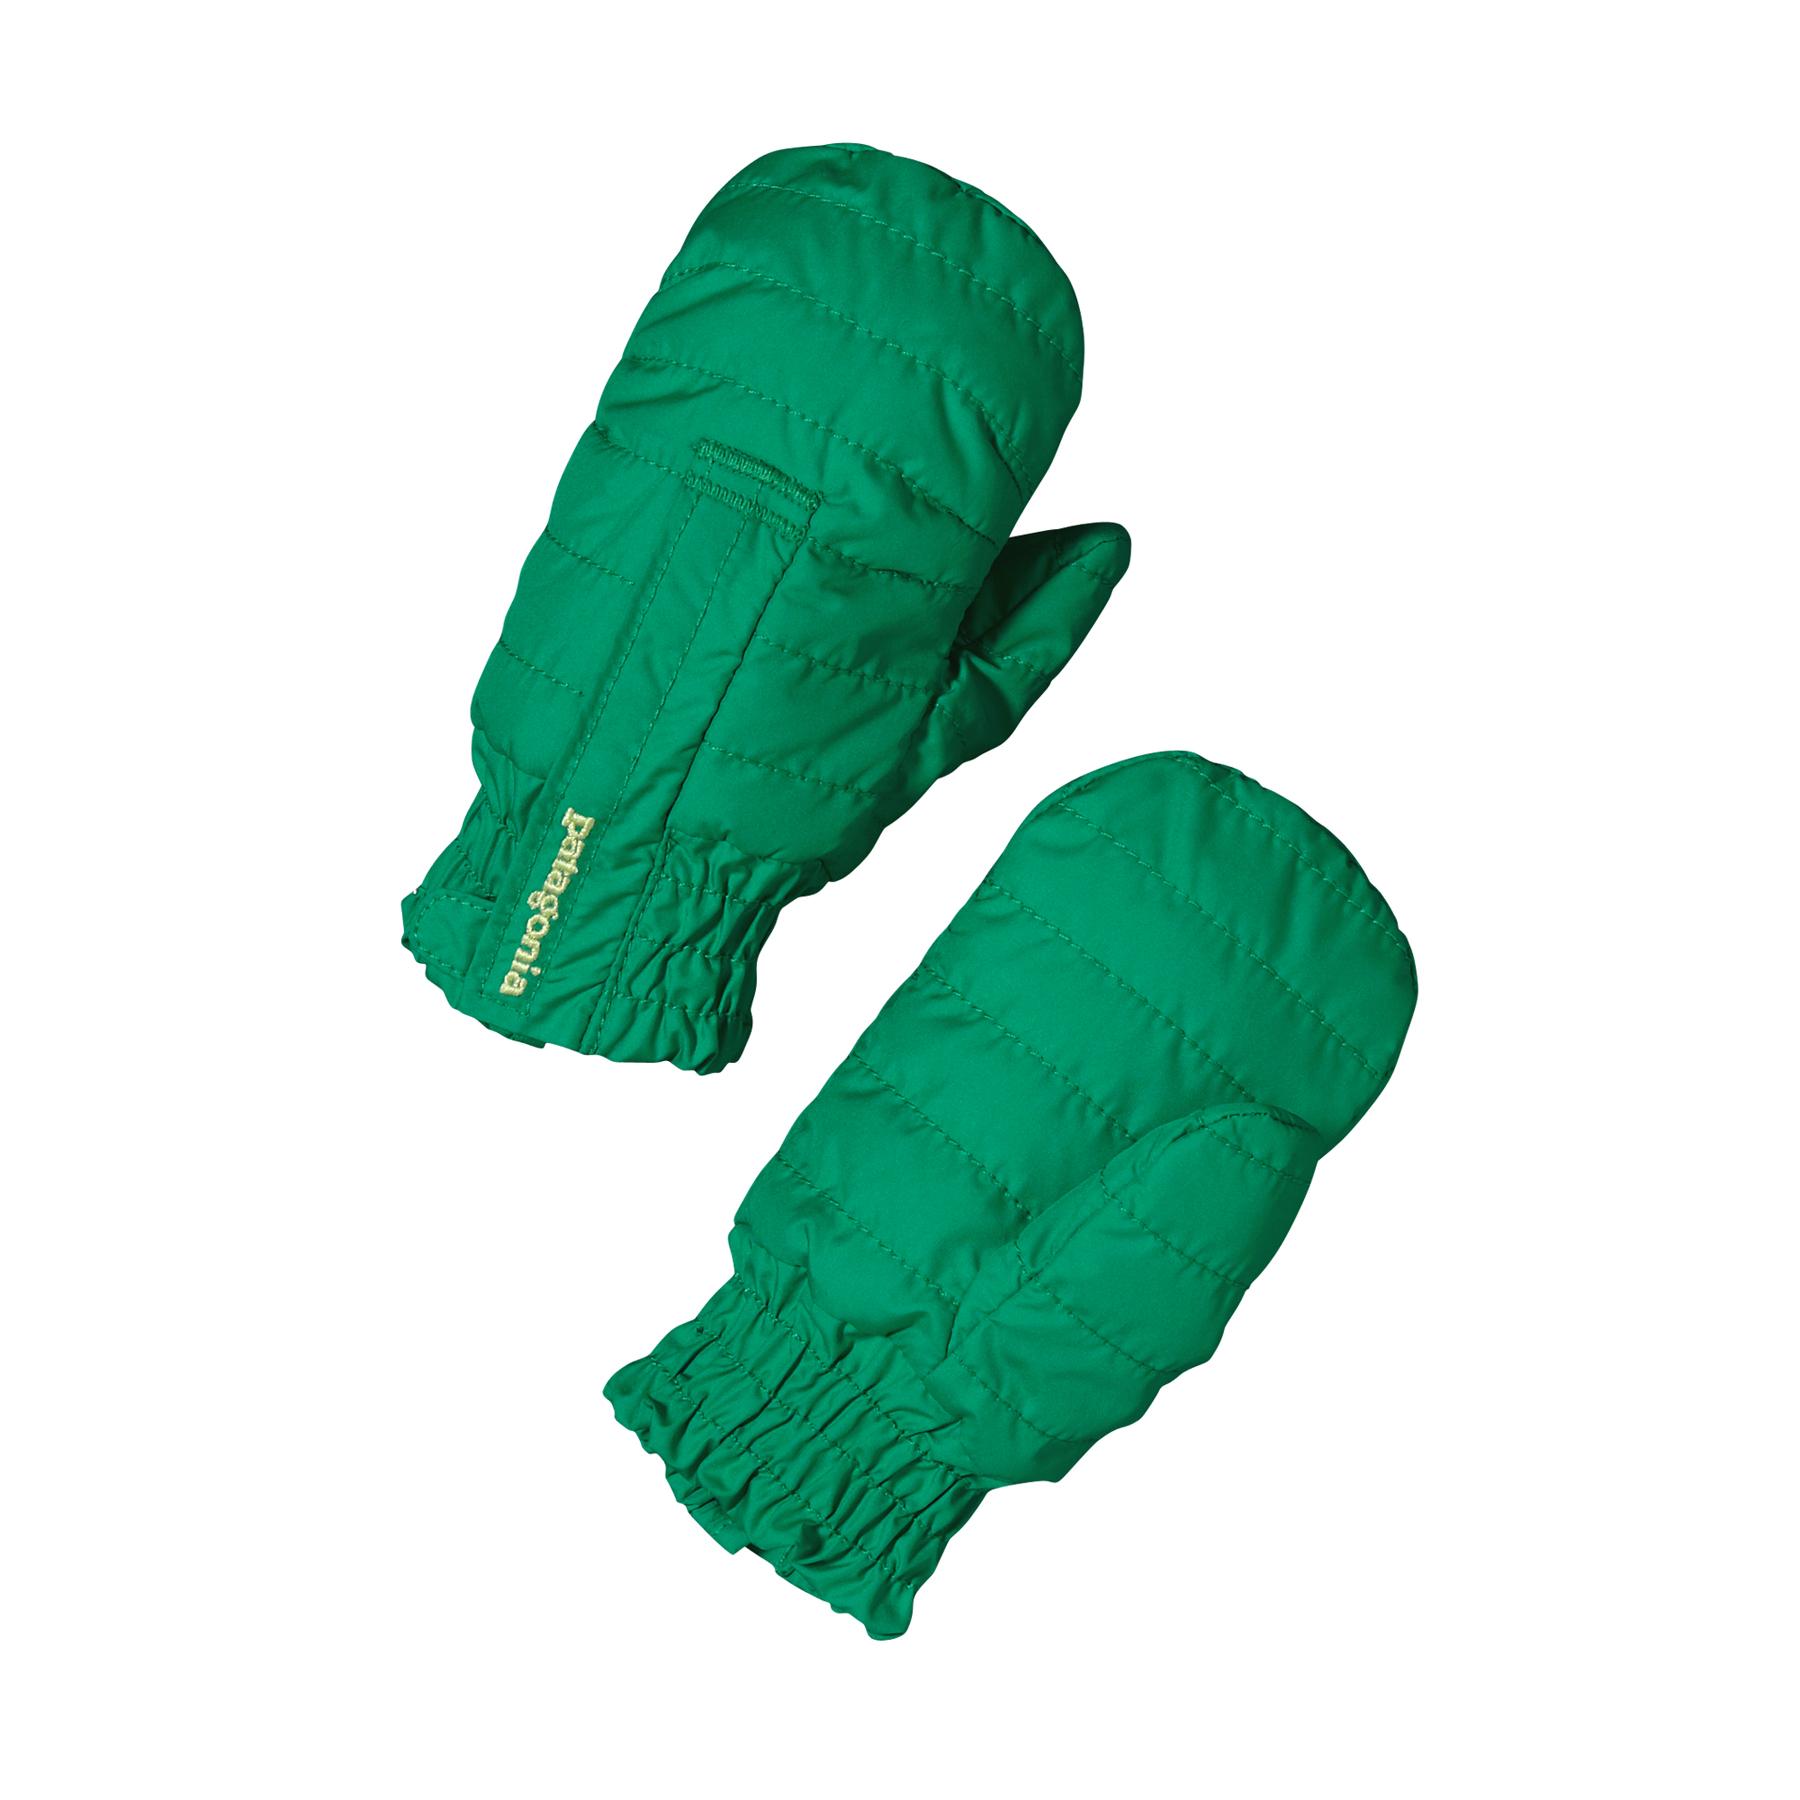 Foto Patagonia Baby Puff Mitts Kids Brilliant Green w/Teal Green (Modell 2013/2014)